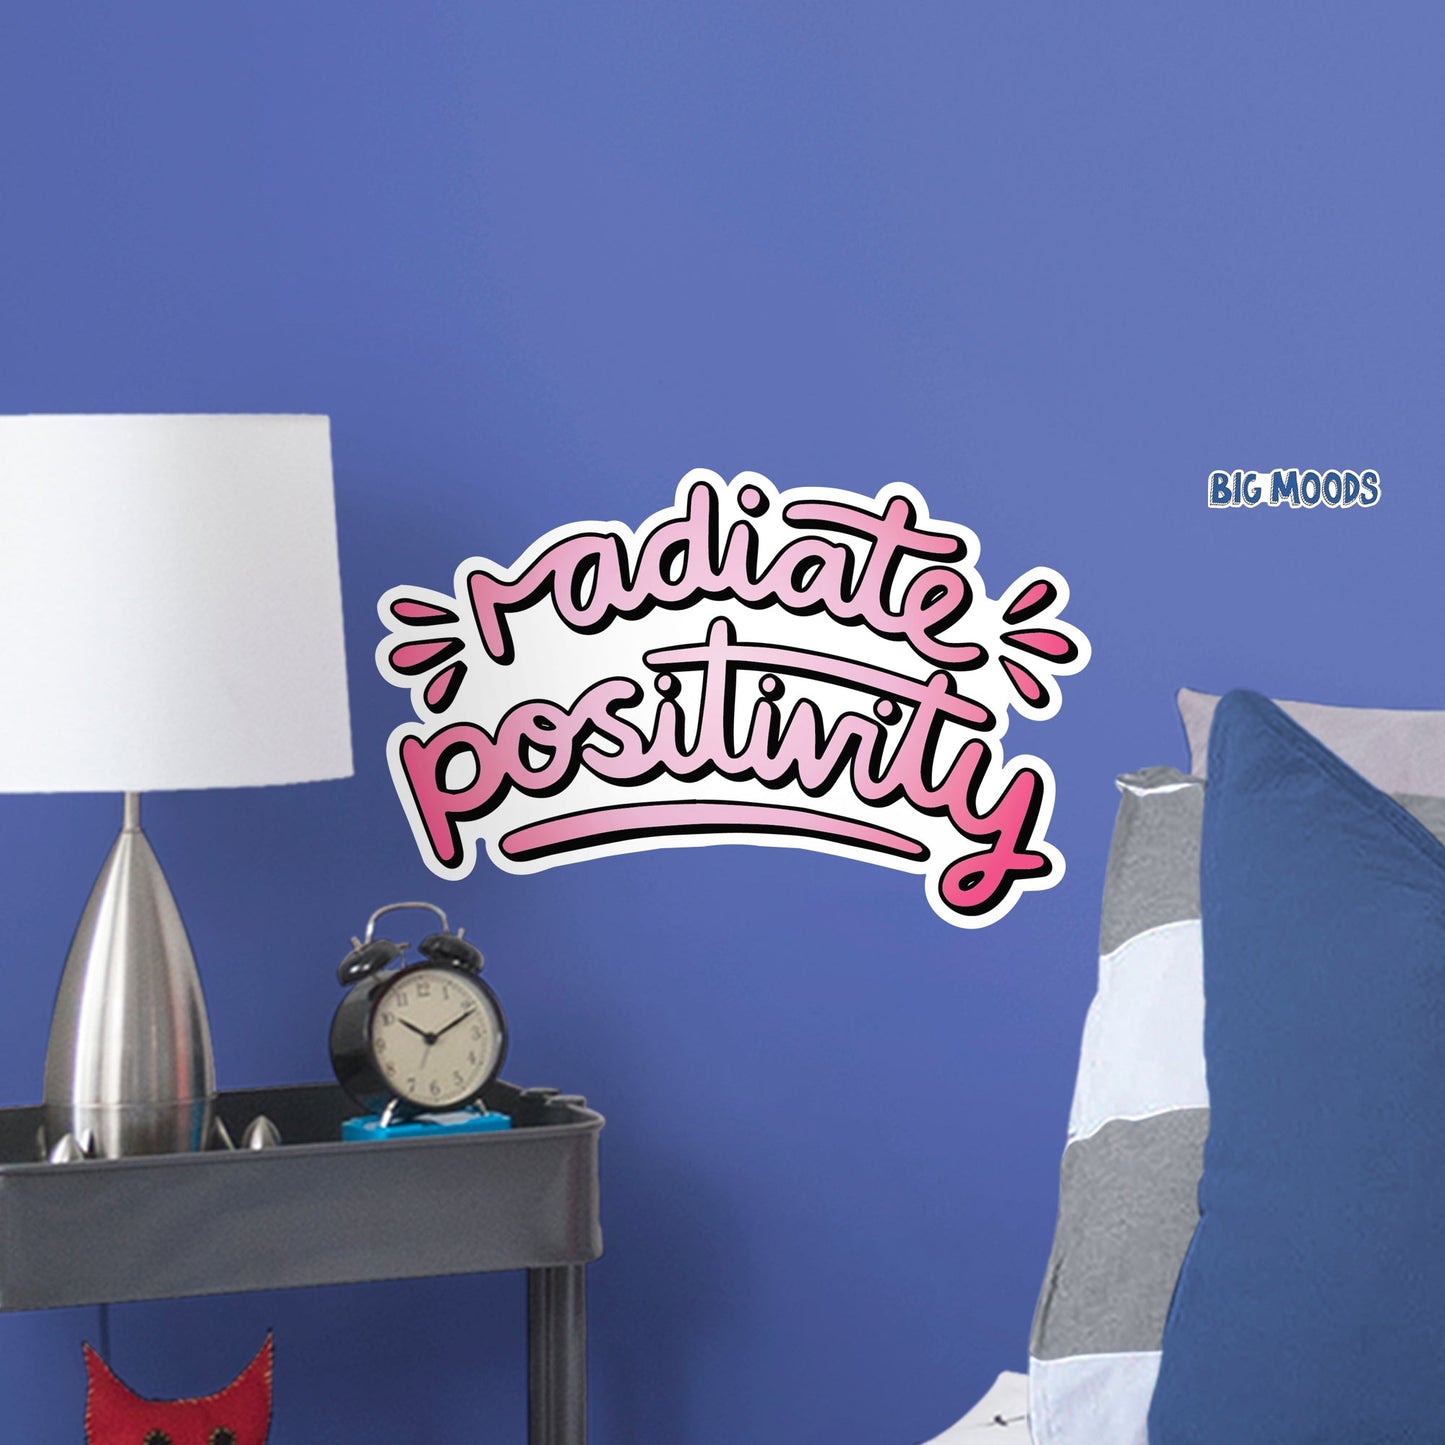 Radiate Positivity (Pink)        - Officially Licensed Big Moods Removable     Adhesive Decal